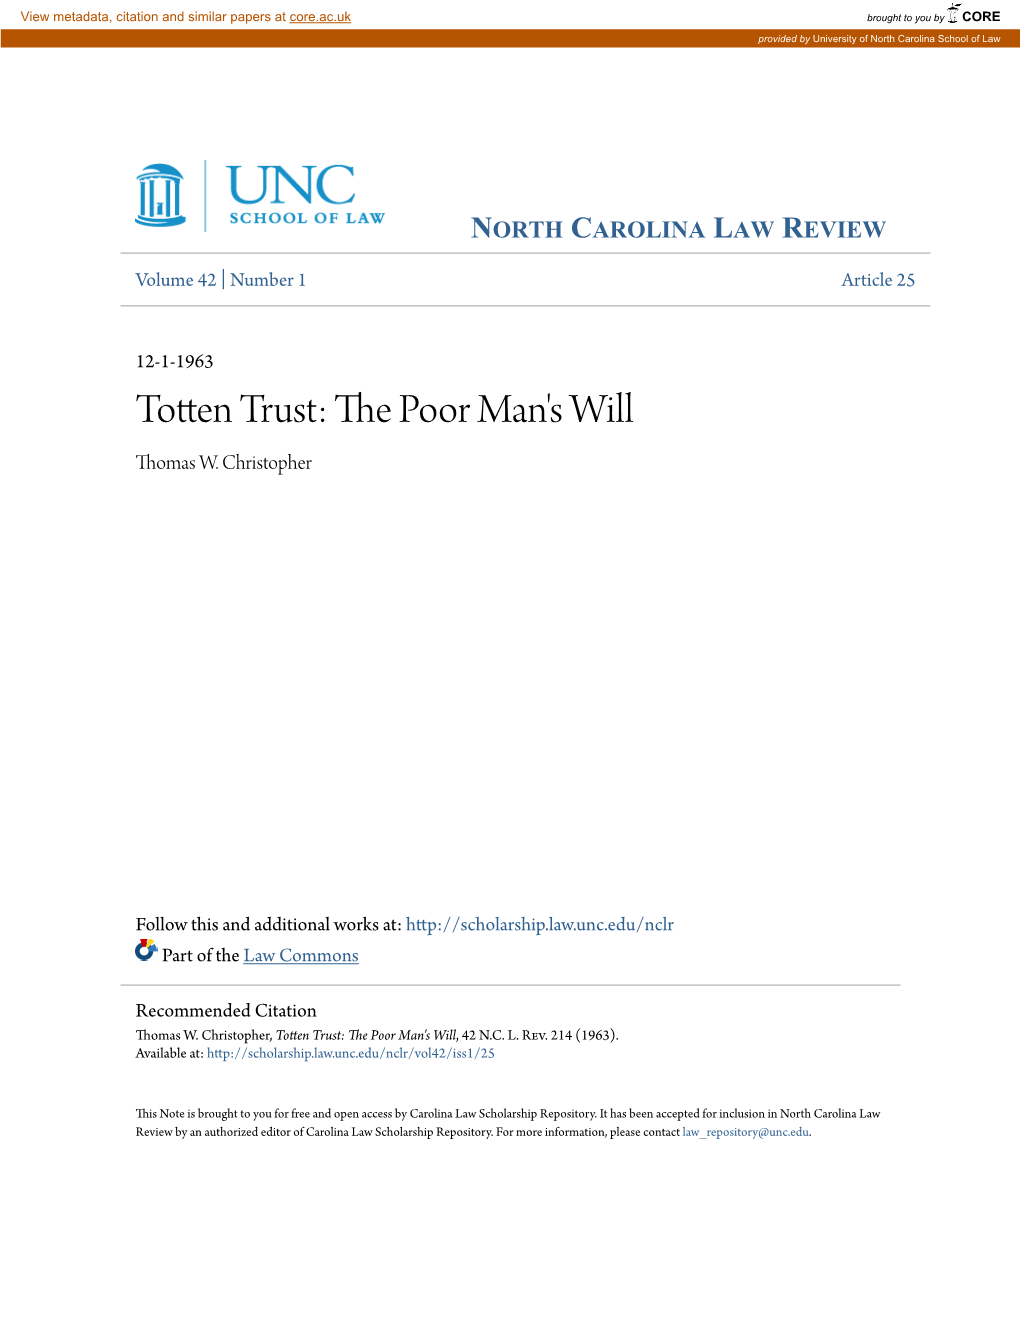 Totten Trust: the Op Or Man's Will Thomas W